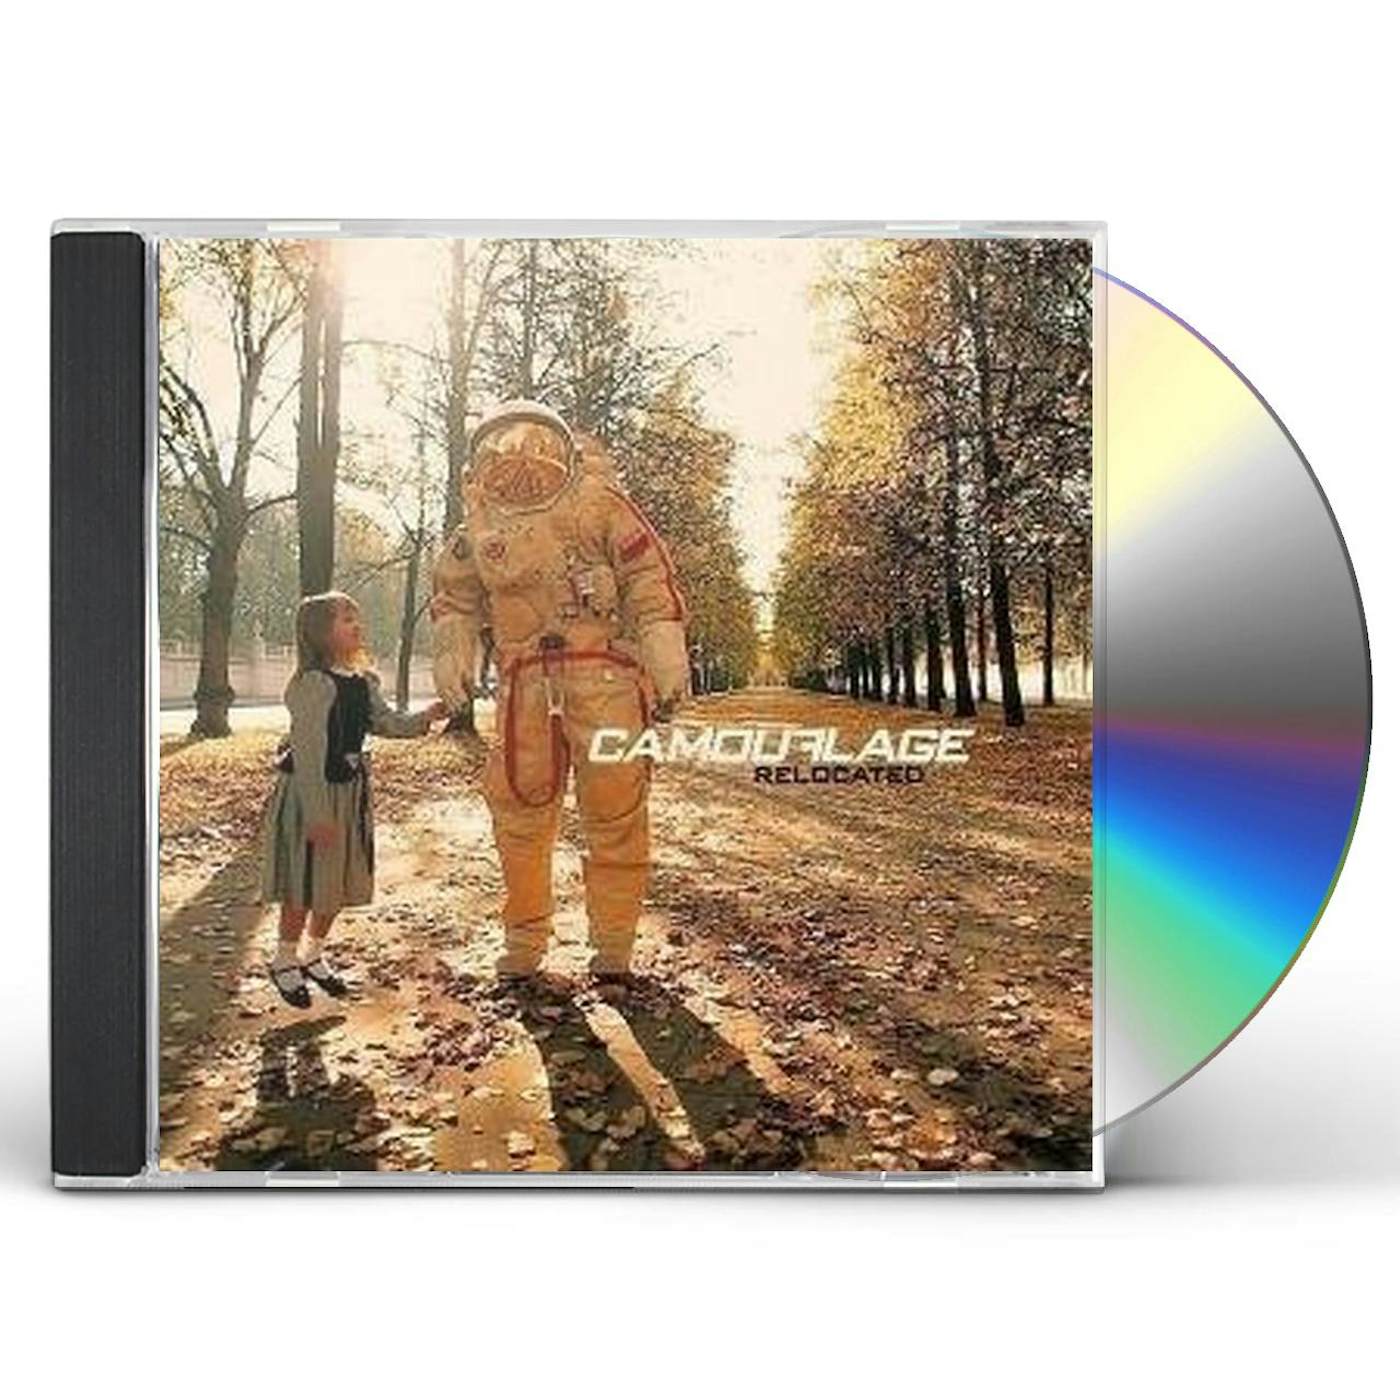 Camouflage RELOCATED CD